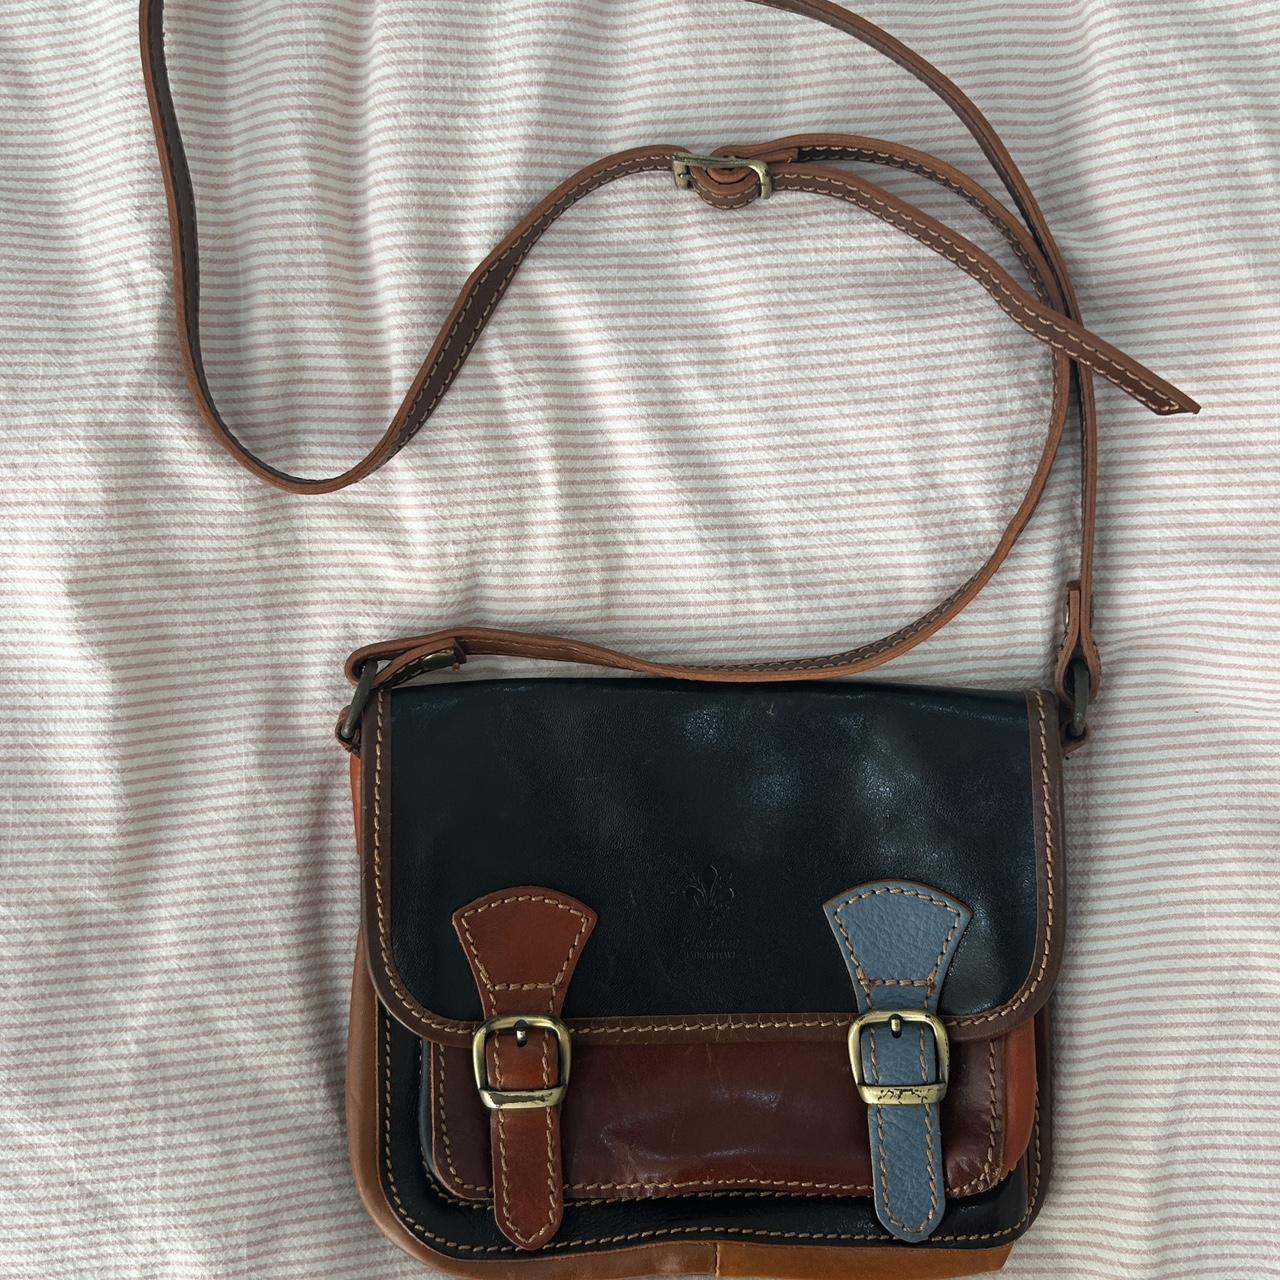 Genuine leather made in Italy bag. Purchased in... - Depop